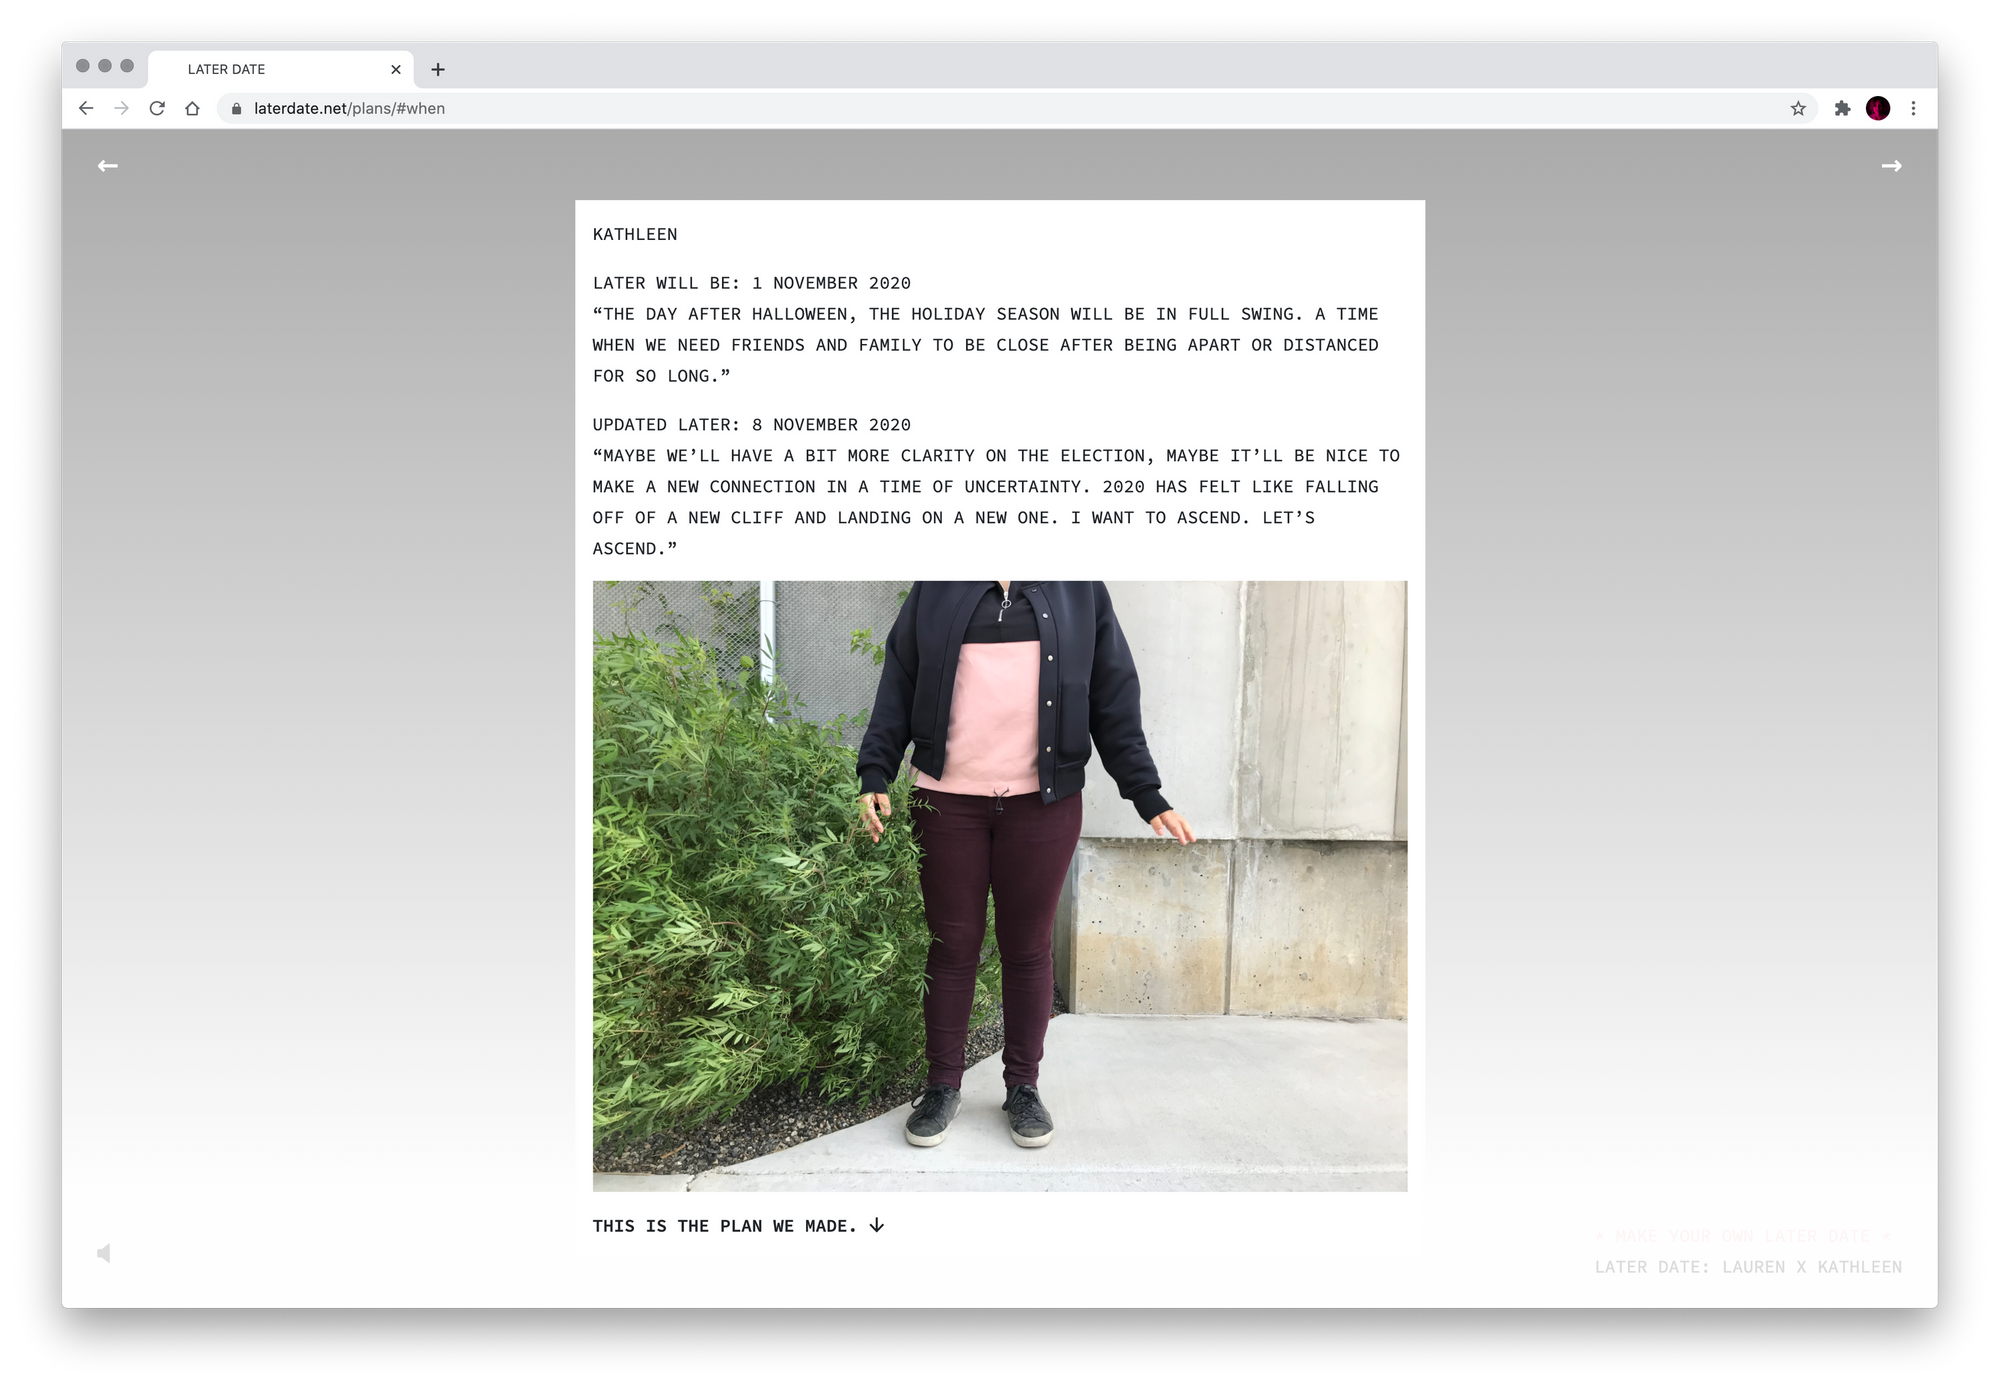 In a screenshot of a browser window, we see some text and the torso of a person wearing brown pants, a pink sweatshirt, and a black jacket. In the text, the person hypothesizes that "later" will be November 1, 2020.